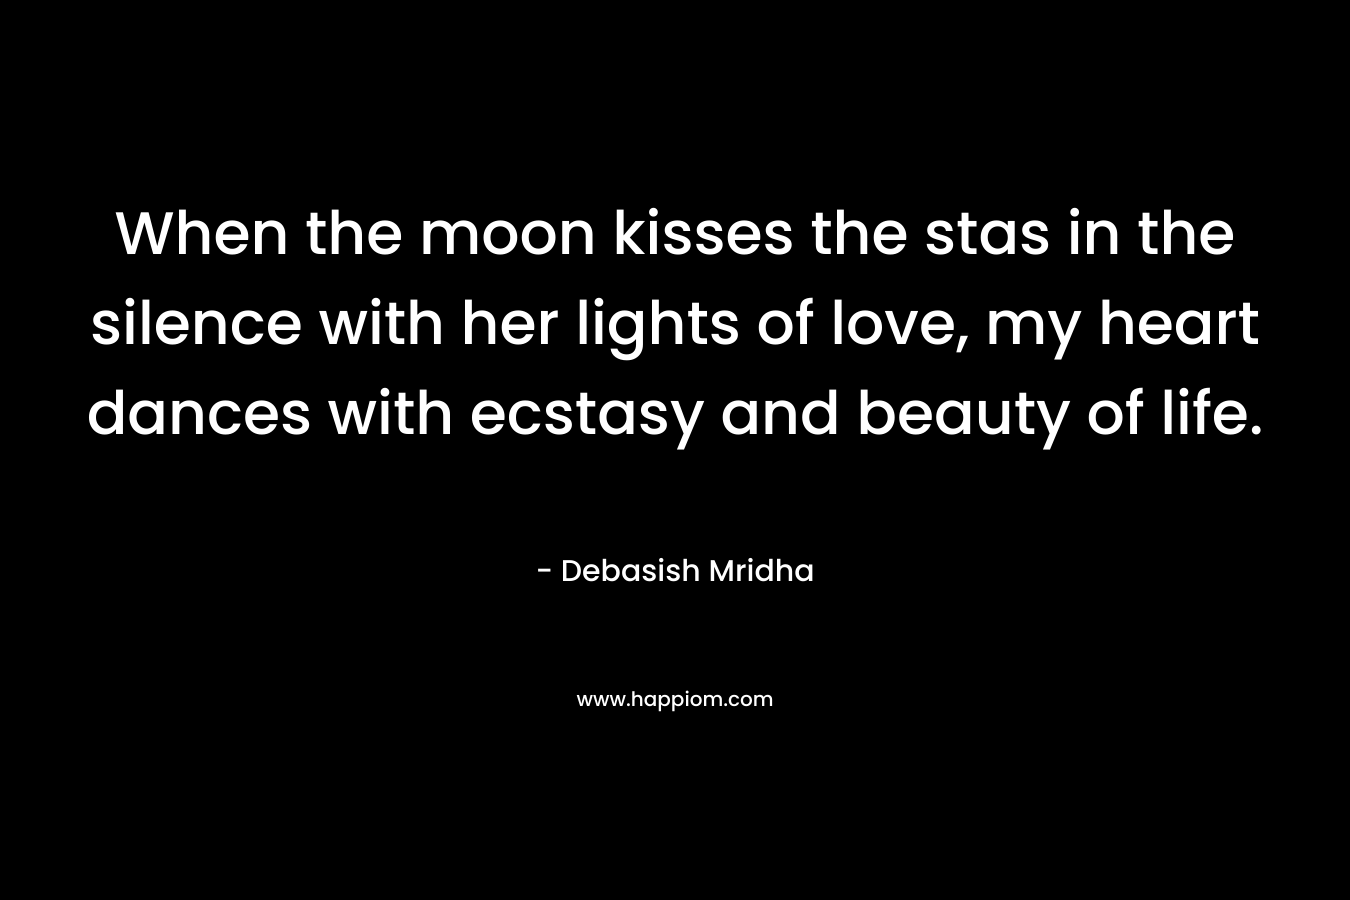 When the moon kisses the stas in the silence with her lights of love, my heart dances with ecstasy and beauty of life. – Debasish Mridha